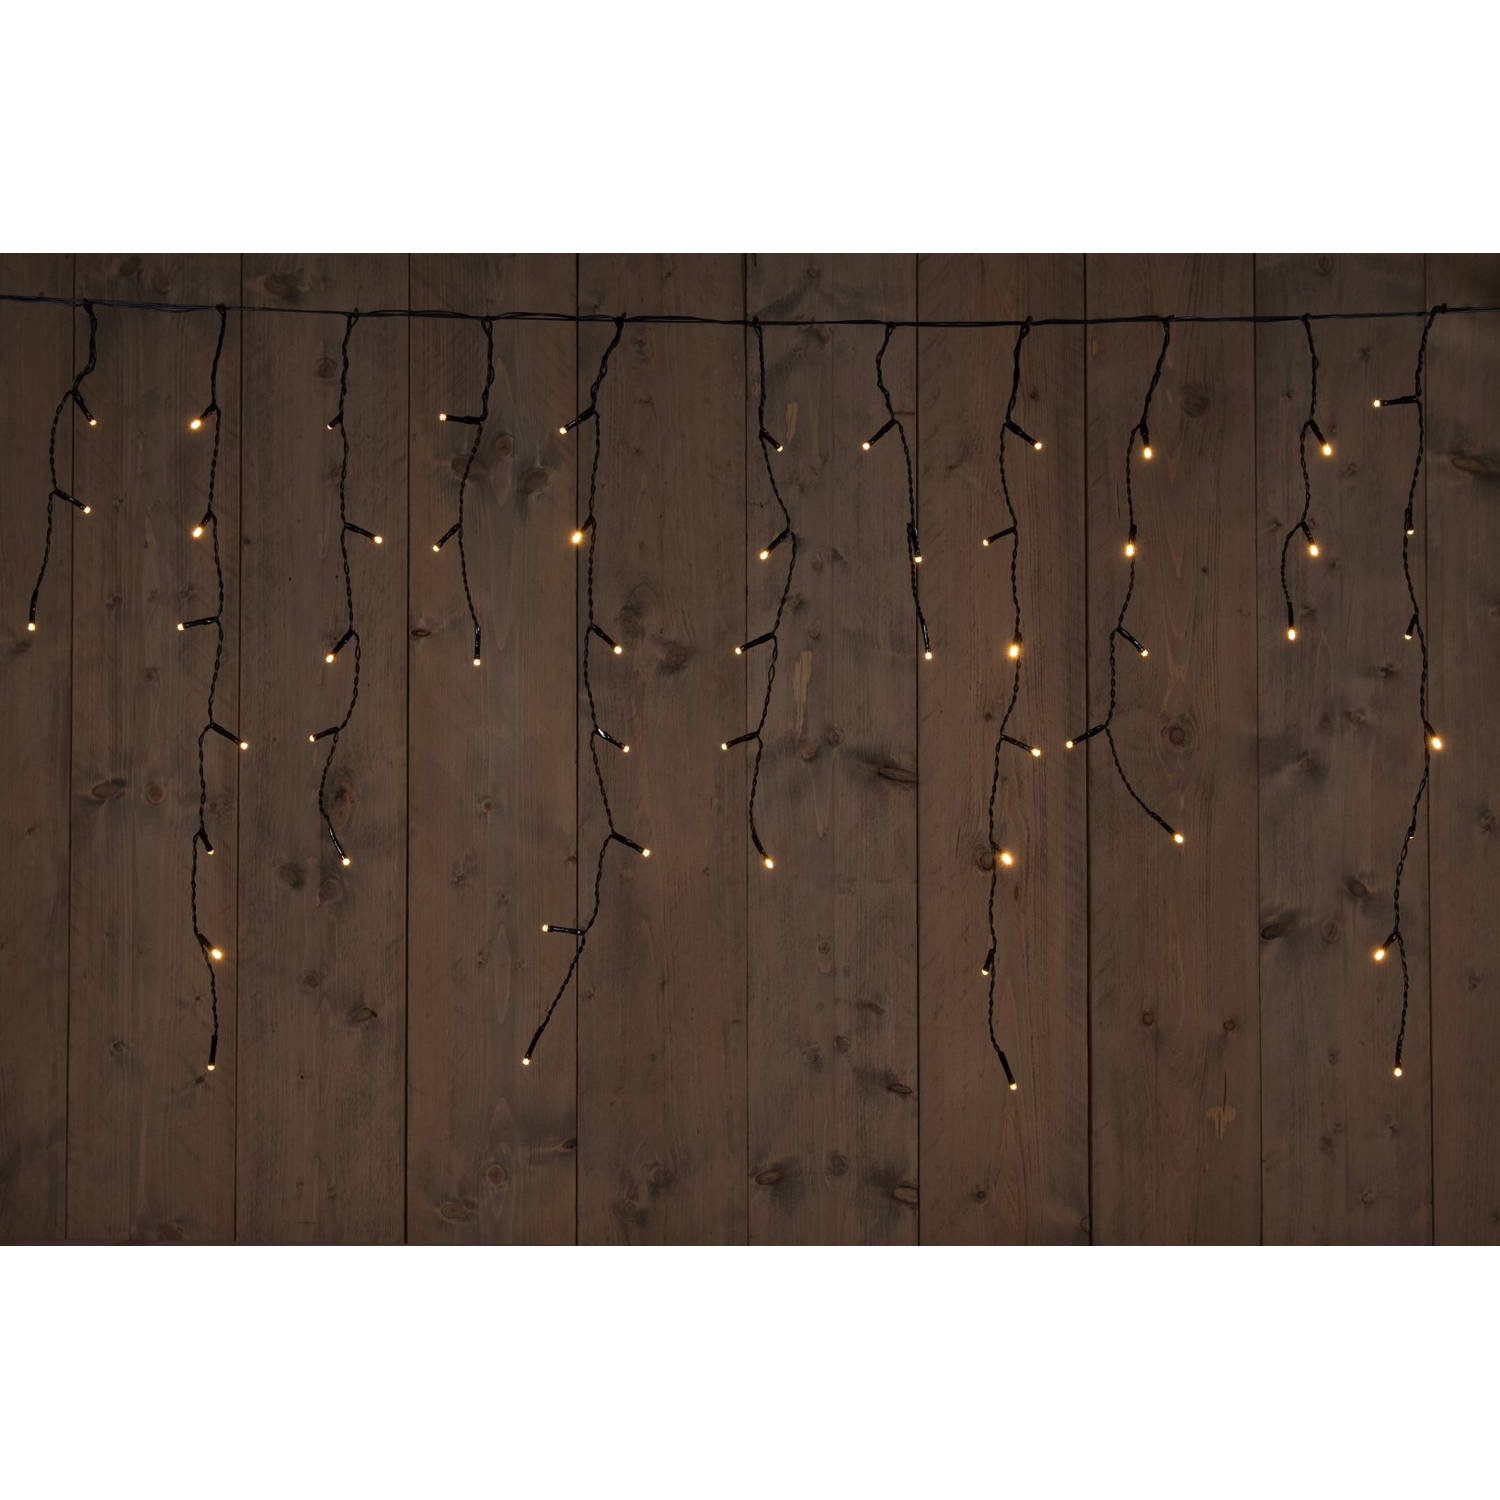 Anna's Collection - Icicle Lights 180L360X60 cm Led Classic Warm - 5M Leadcable